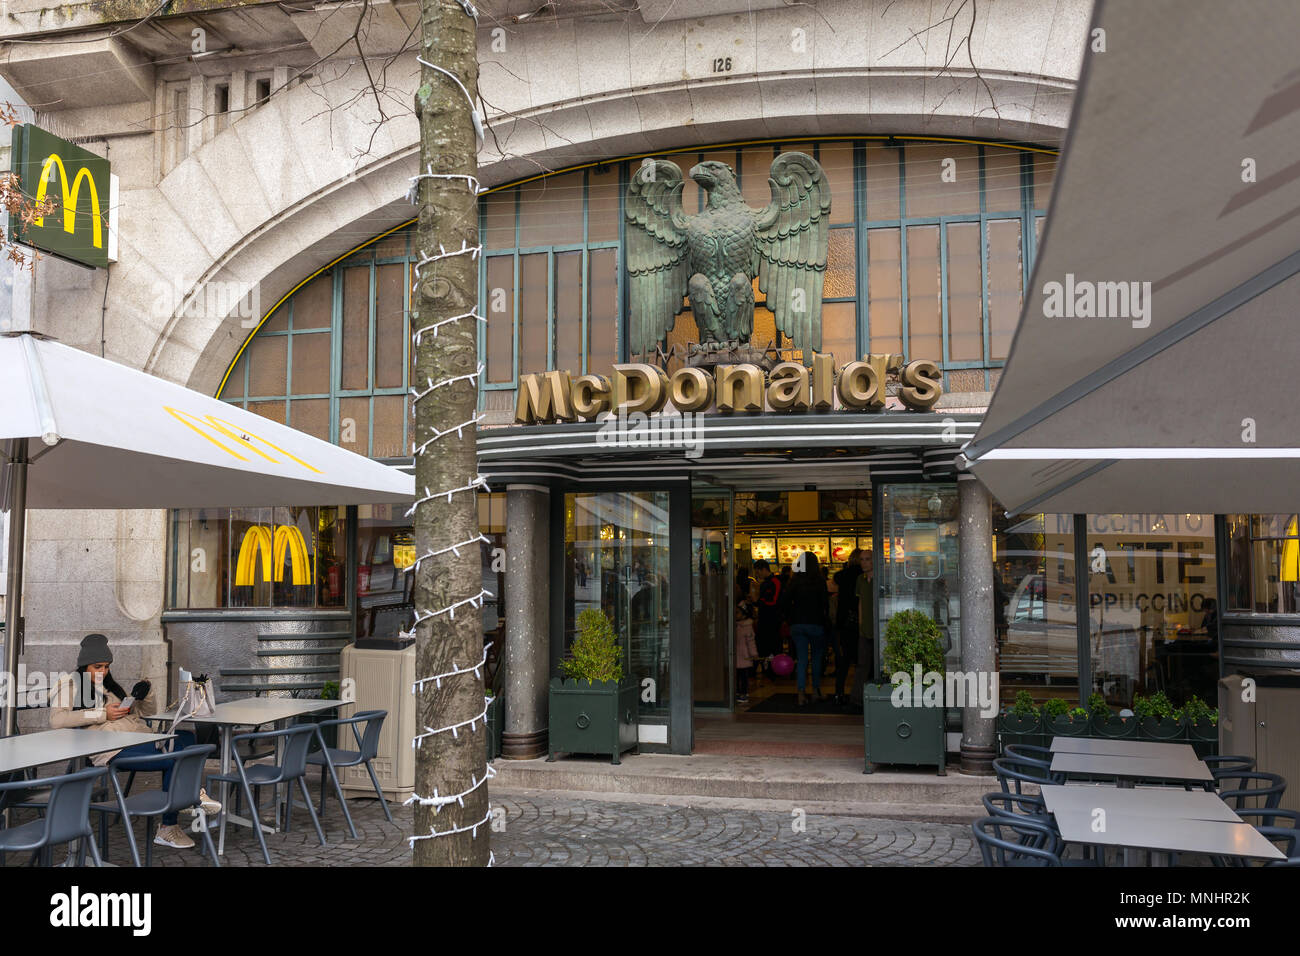 Porto, Portugal - January 14, 2018: Famous McDonald's Imperial restaurant is an historical cafe in Porto, Portugal Stock Photo